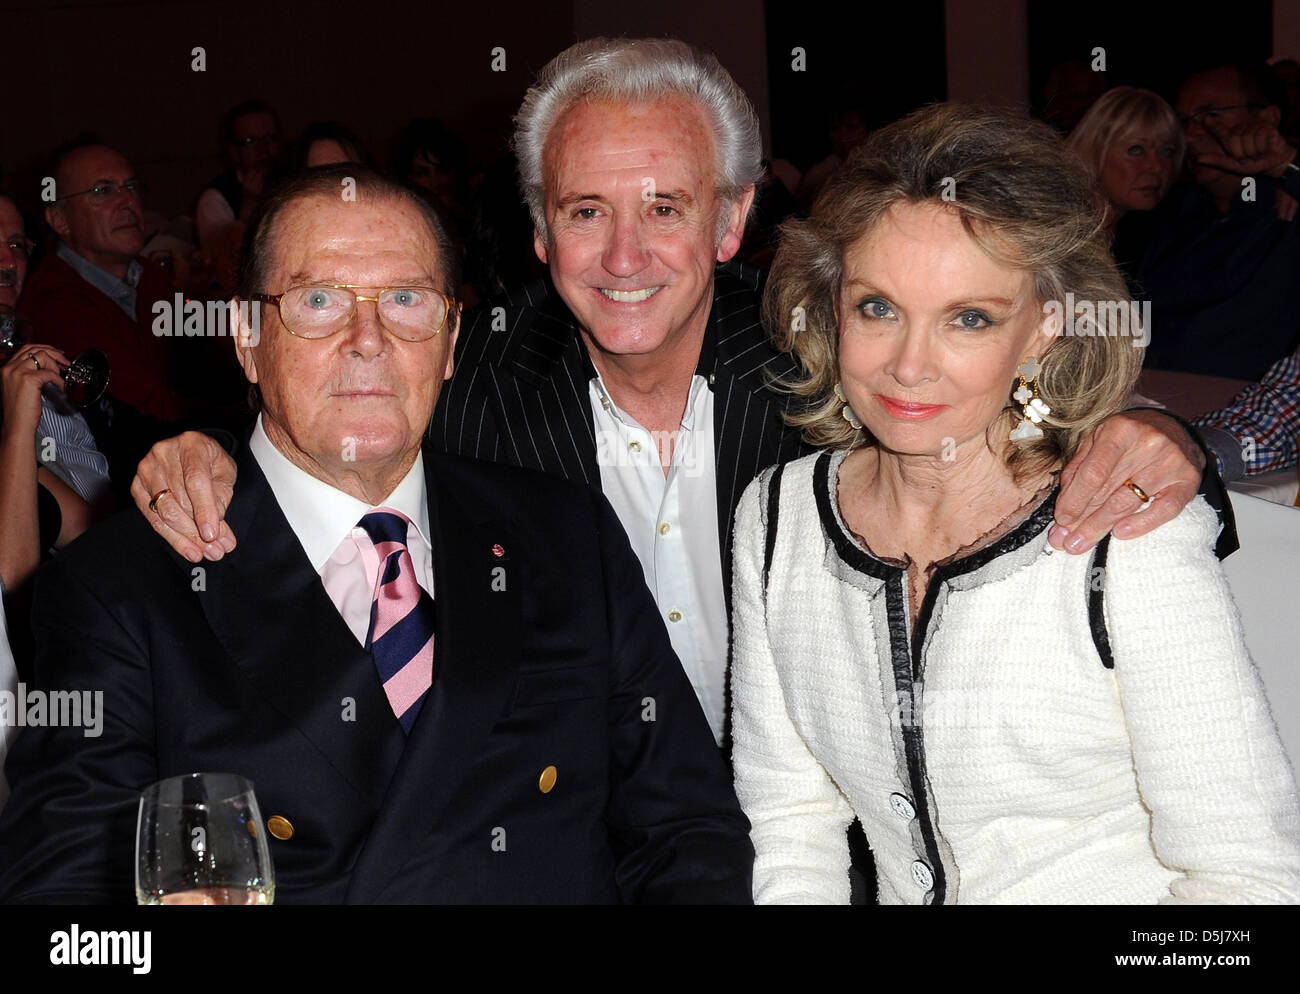 British actor Sir Roger Moore (l), his wife Kristina Tholstrup (r) and British singer Tony Christie (M) talk at the Get Together Party of the Hermes Eagles Golf cup at Nobilis Robinson Club in Belek, Turkey, 16 November 2012. Celebrities from sports, film and economy play for foundations such as the childrens emergency funds and the Beckenbauer foundation. Photo: Ursula Dueren Stock Photo